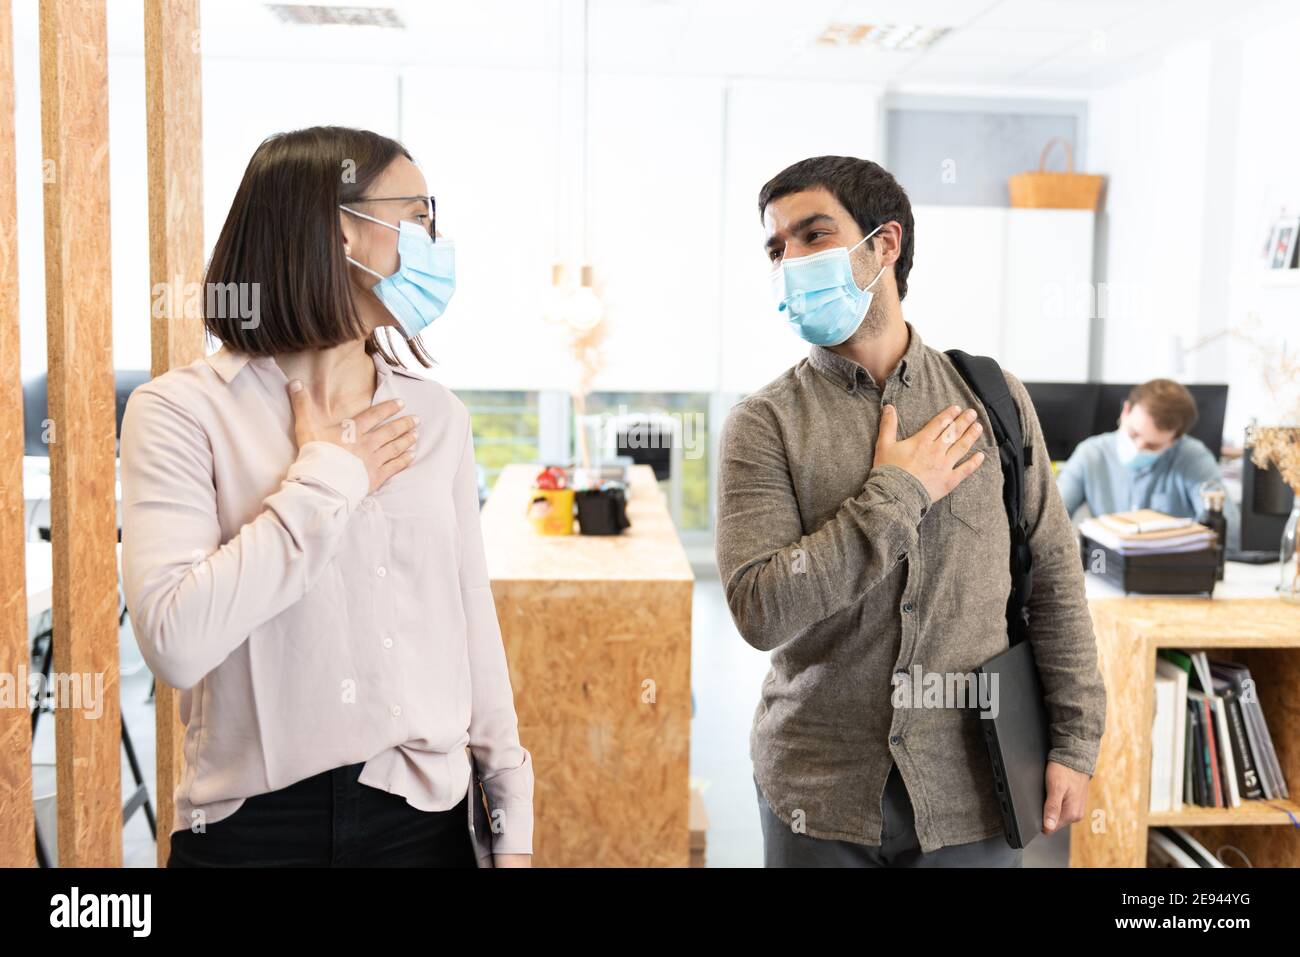 Hispanic coworkers greeting with the hand on chest. Working in the office during Coronavirus pandemic concept. Stock Photo